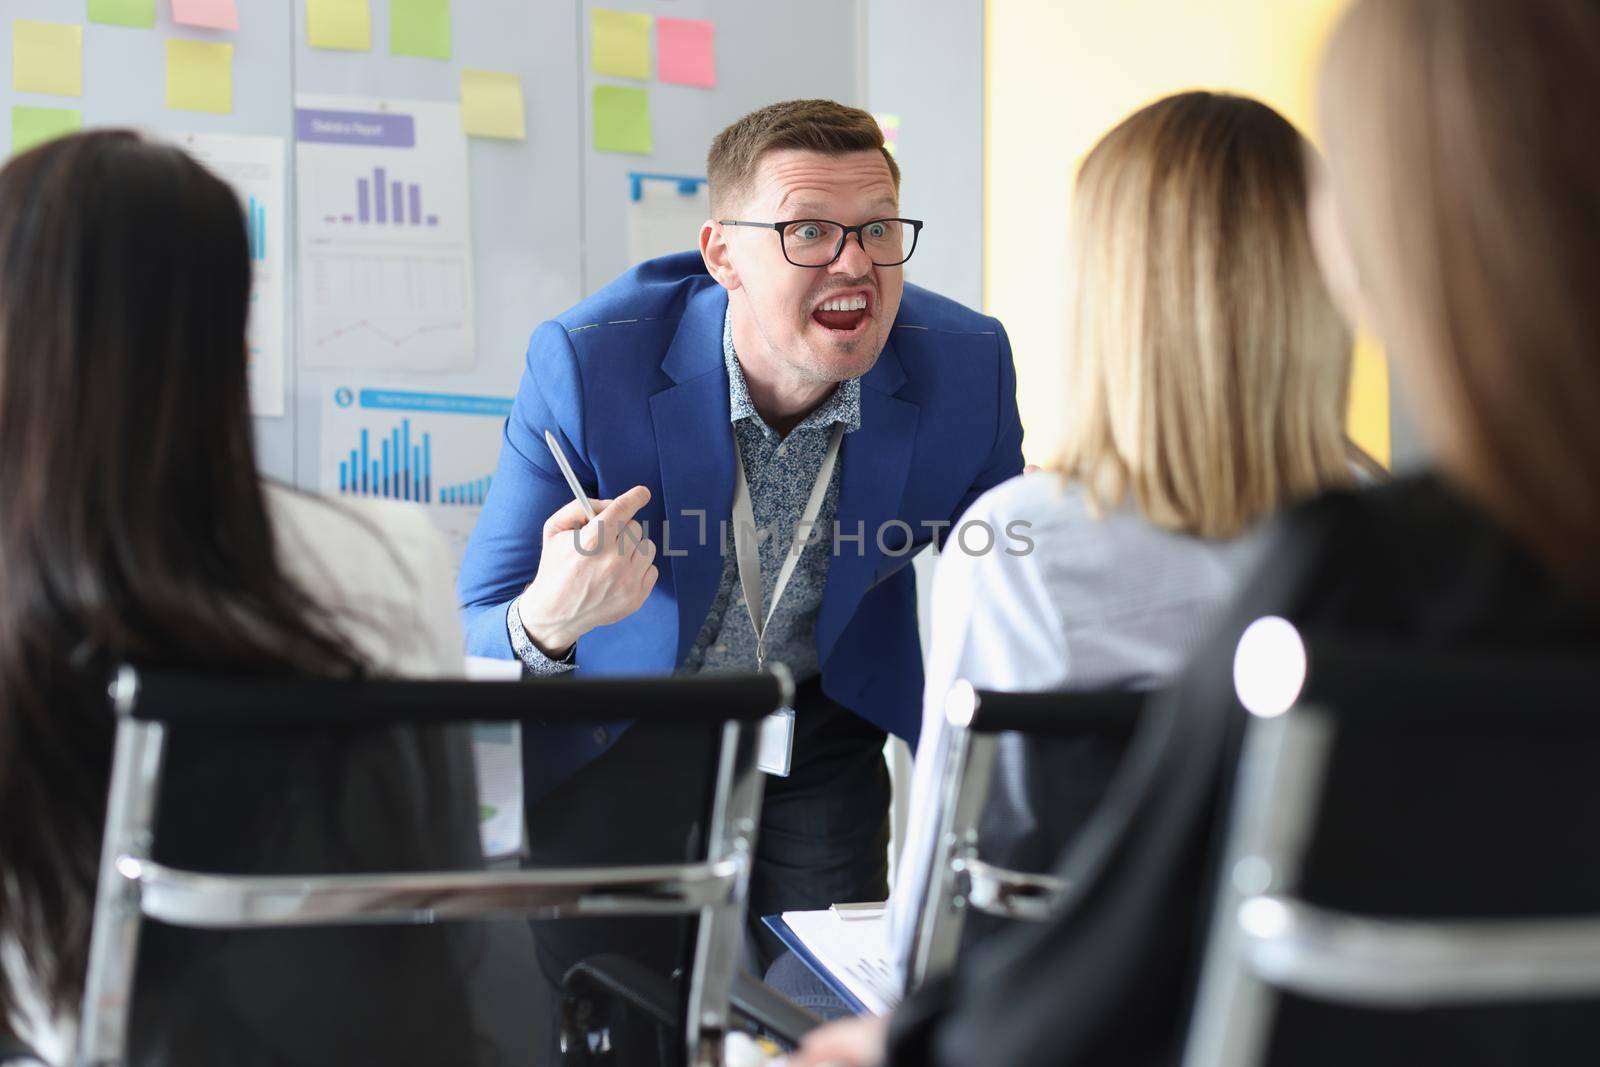 Portrait of serious man scream on training session, passionate speech with bright emotions. Training for company workers, skills development, class concept